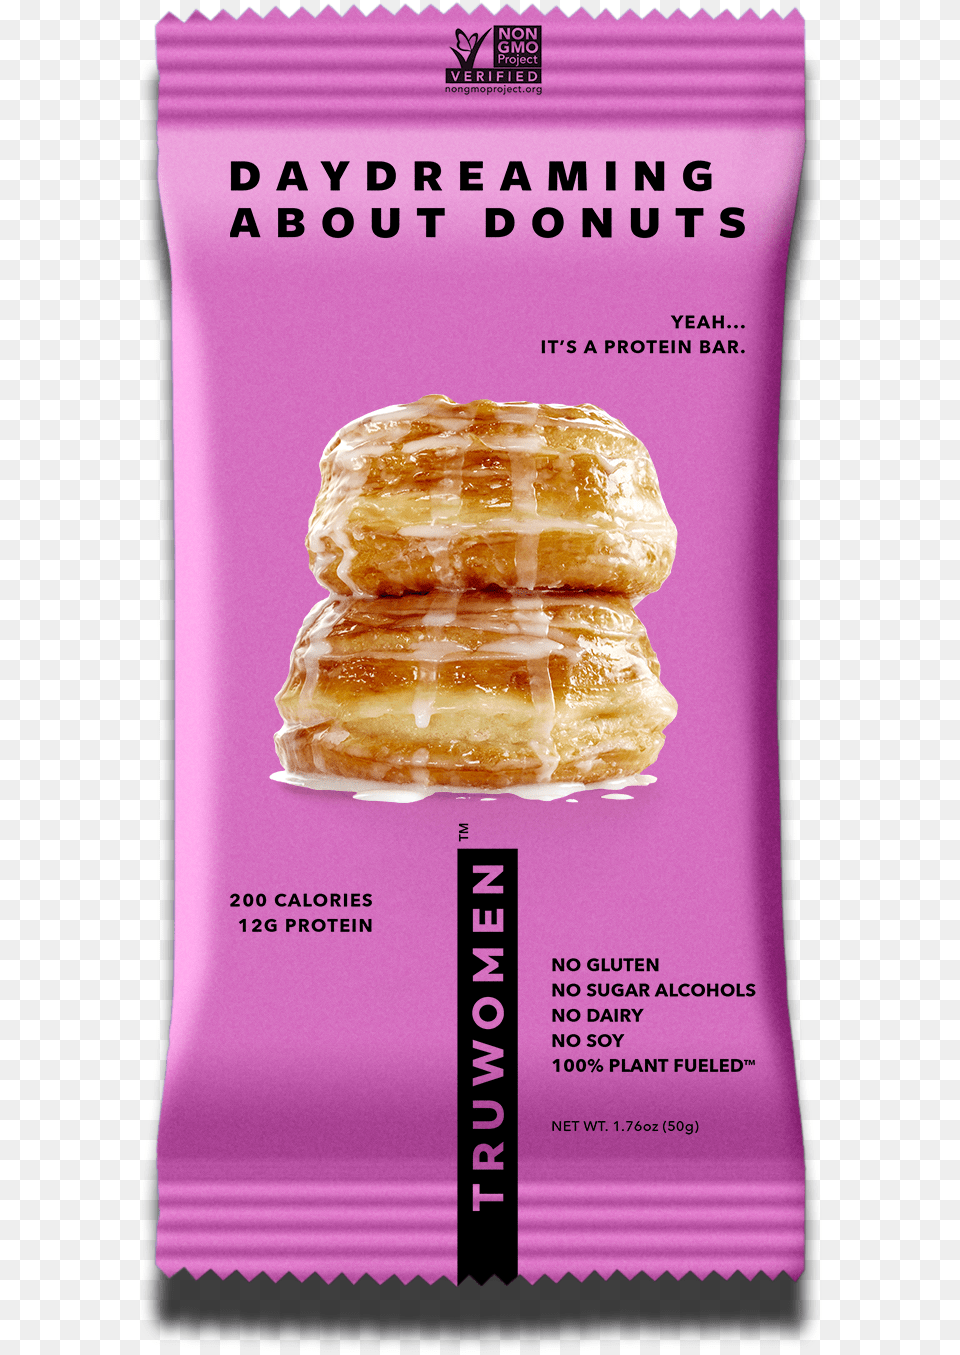 Daydreaming About Donuts Truwomen Bars, Dessert, Food, Pastry, Sweets Png Image